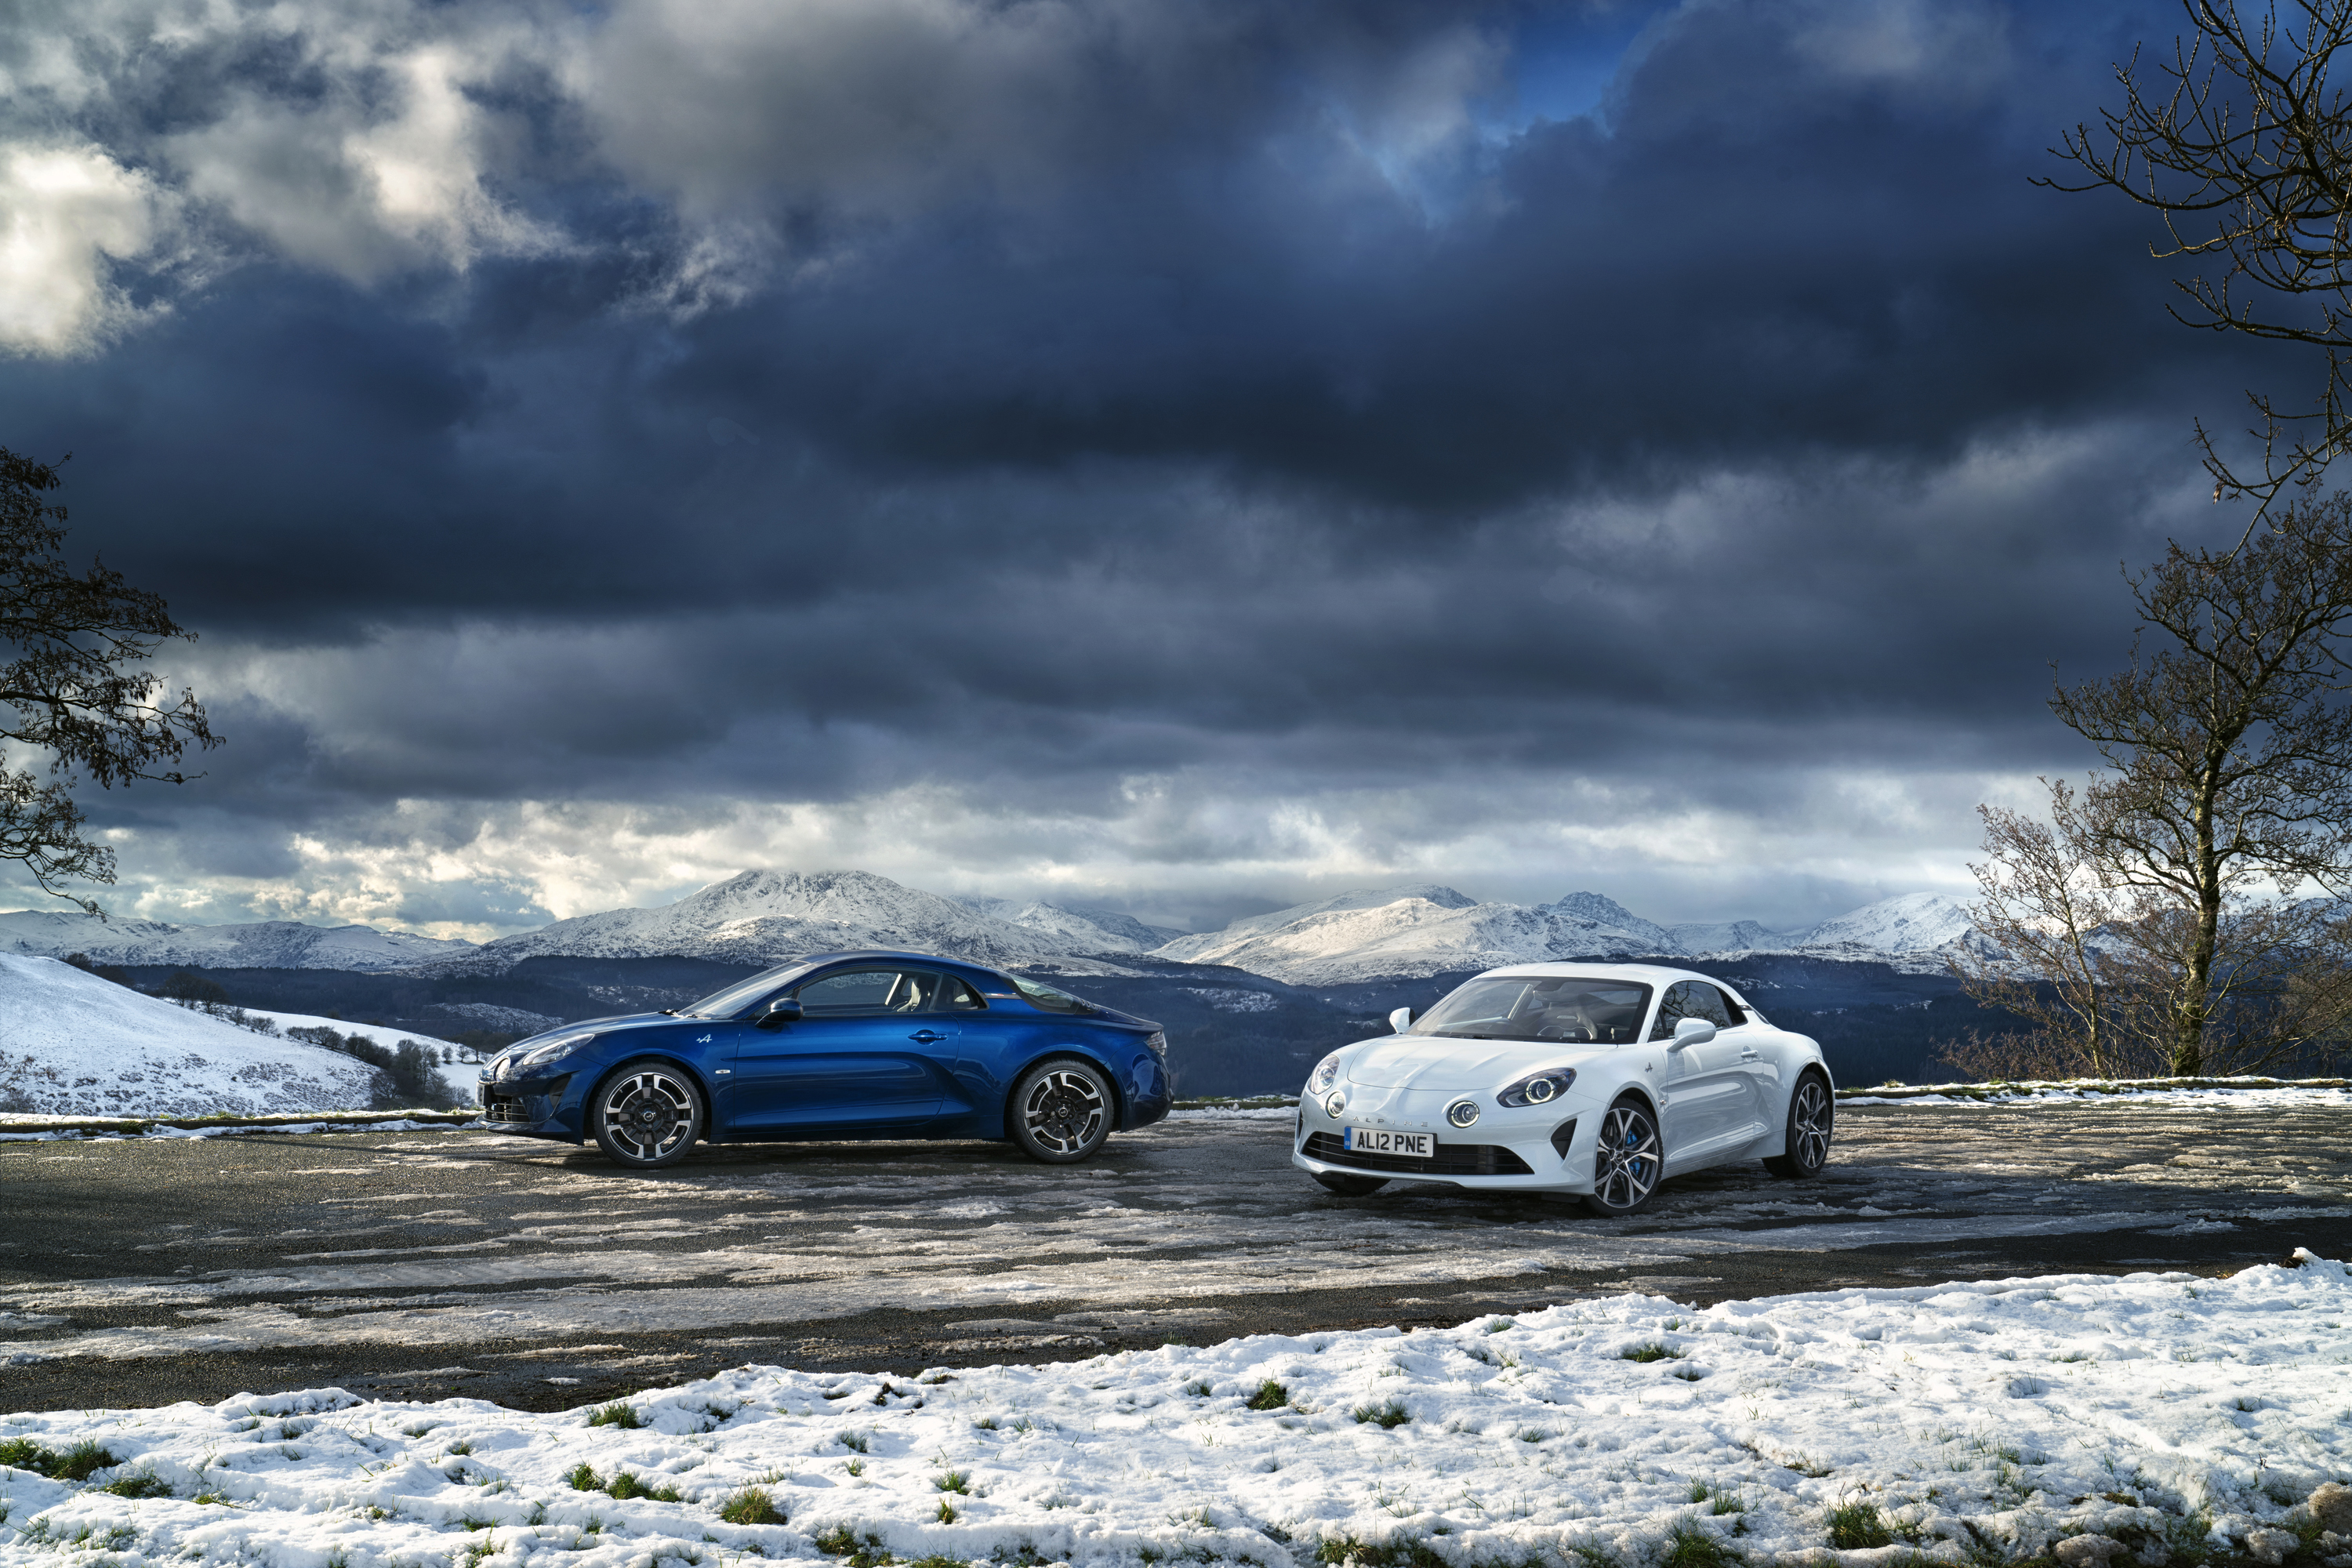 10 Renault Alpine HD Wallpapers and Backgrounds